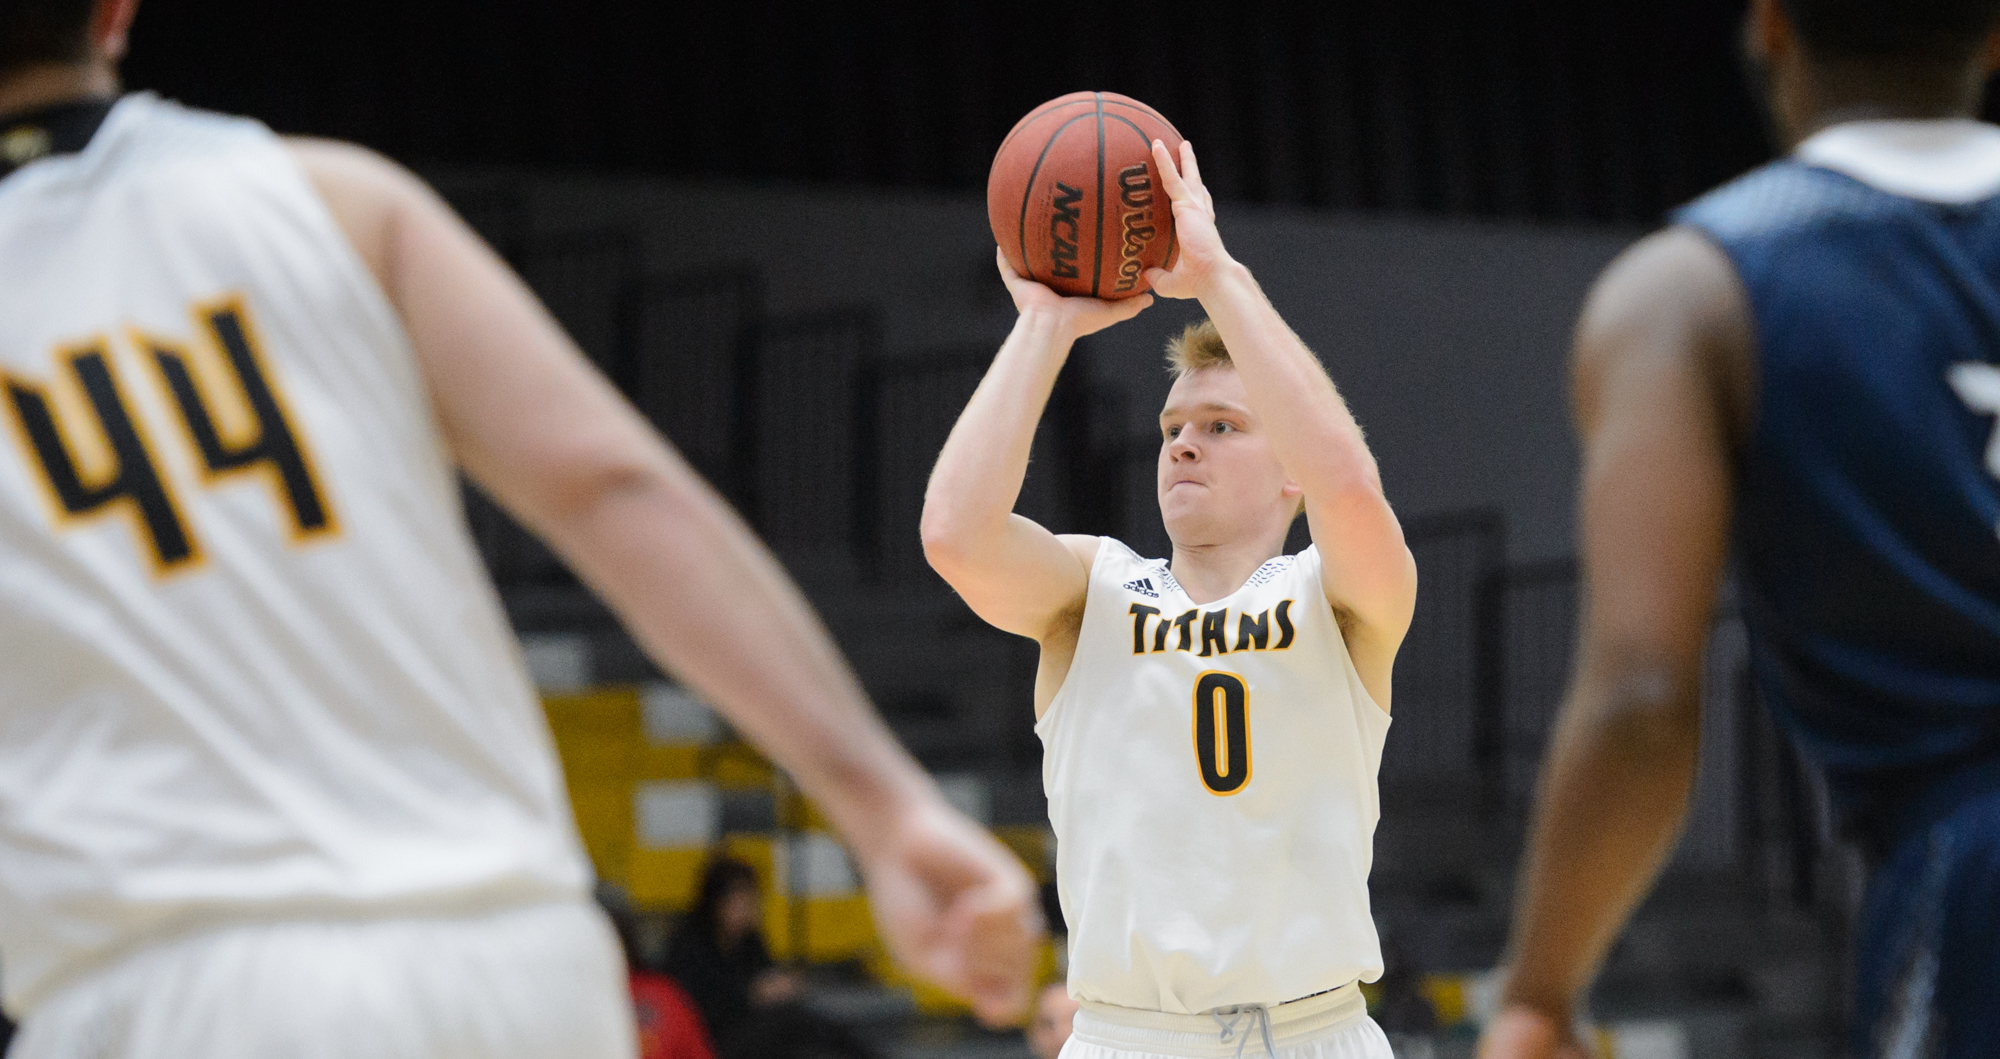 Charlie Noone scored a game-high 17 points against the Blugolds, including 12 that came in the first half.